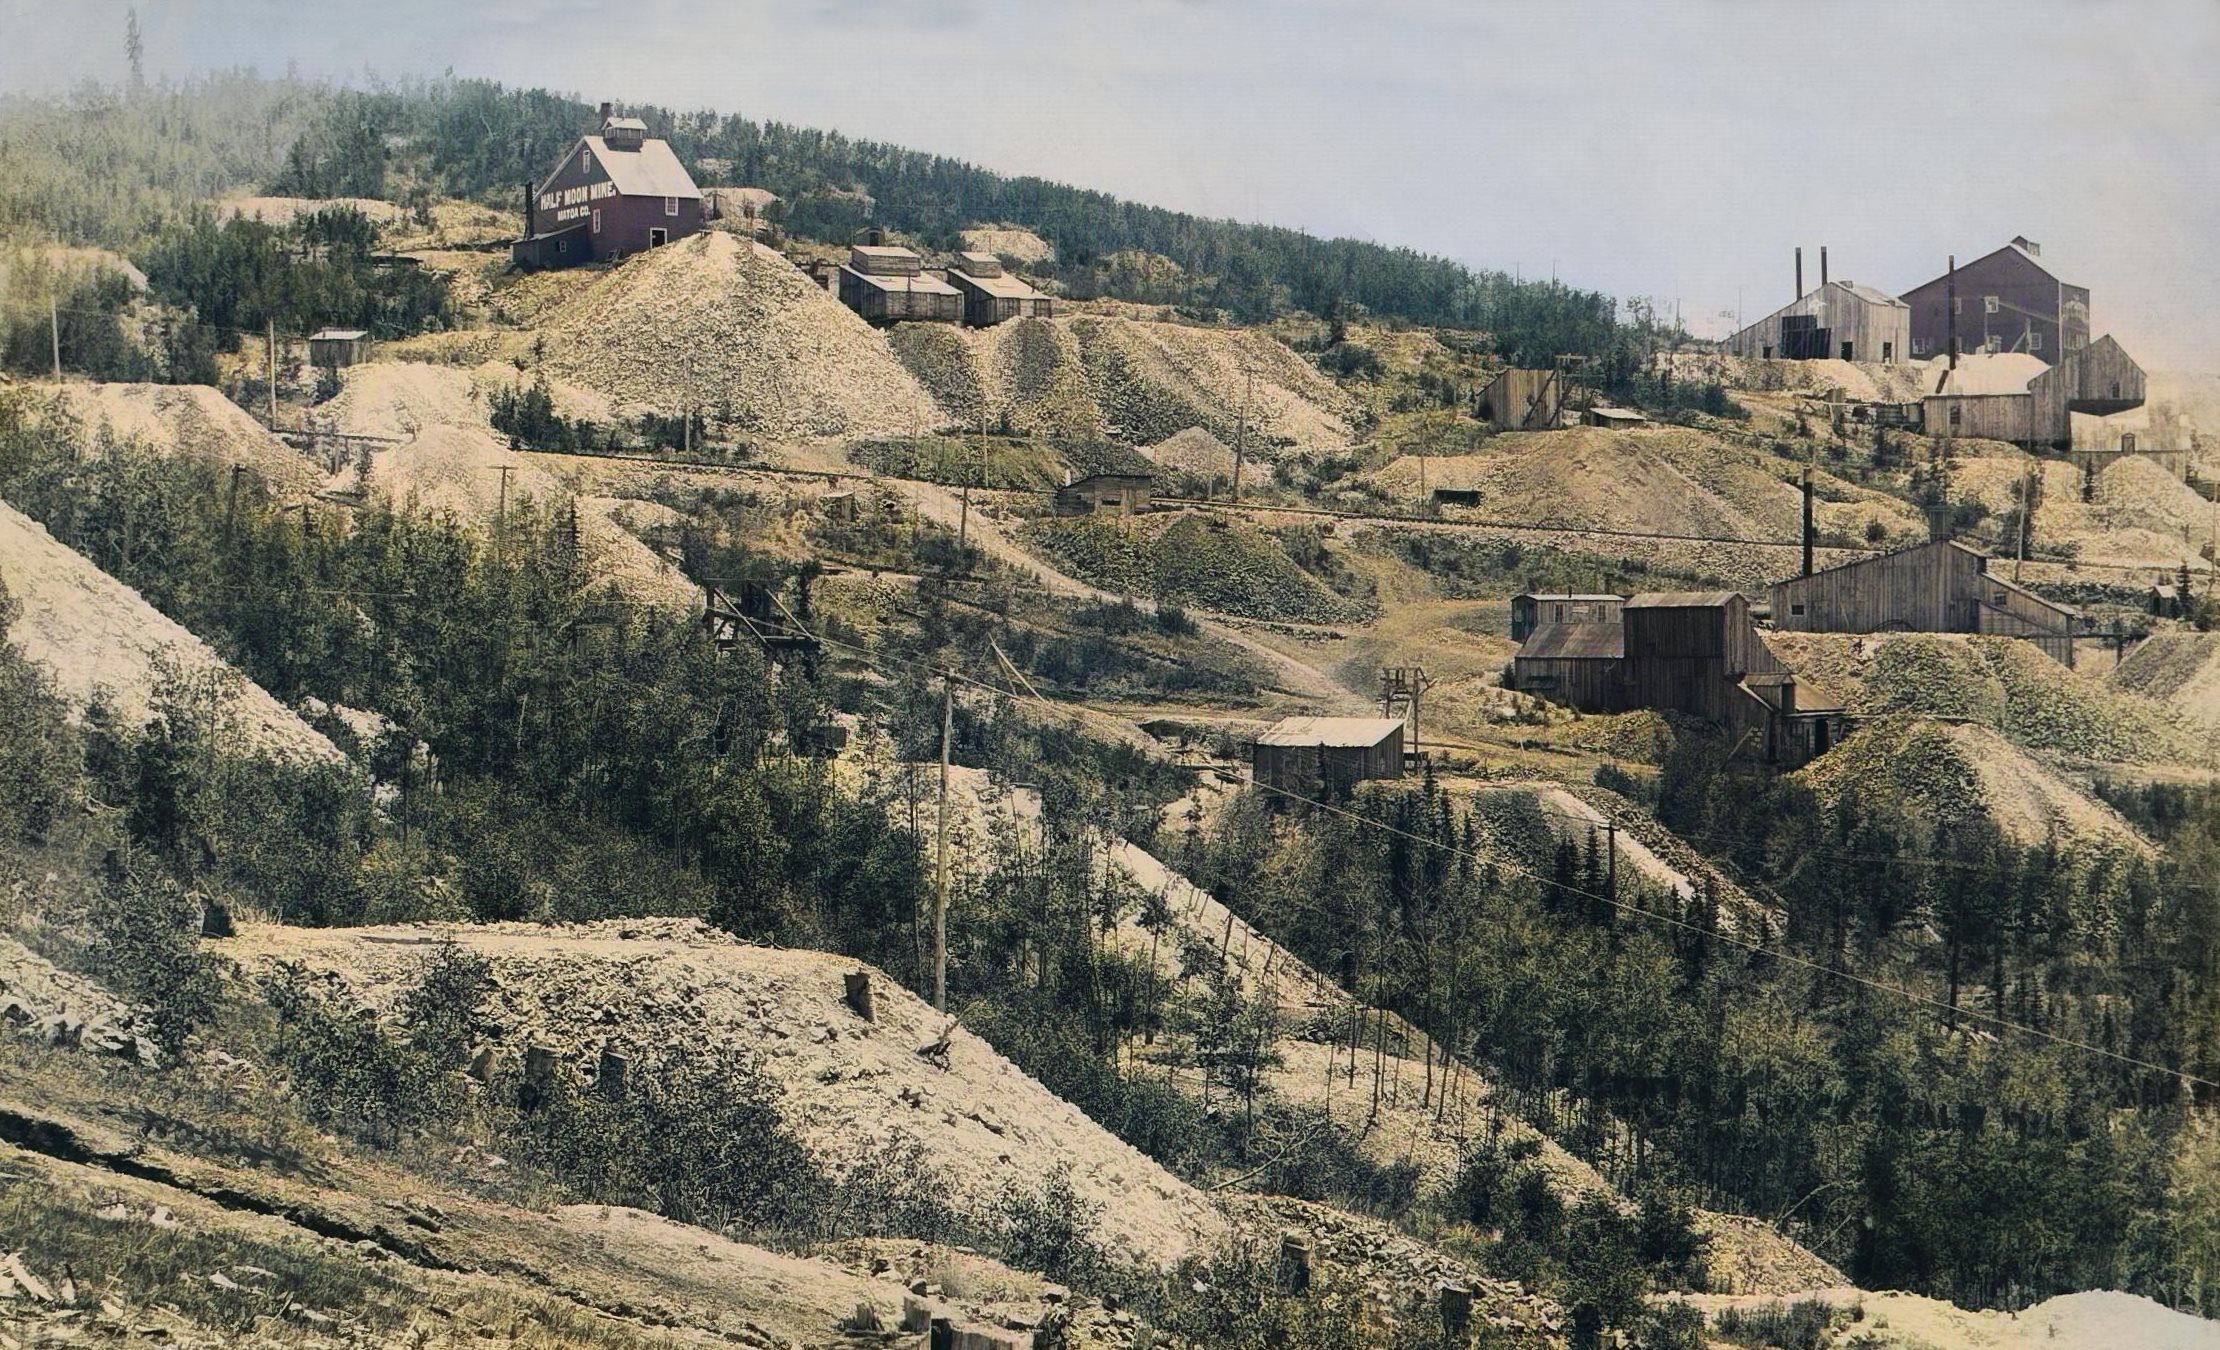 Gold Hill Mines, including the Half Moon & the Anchoria-Leland Mines, and Part of the Original High Line Trolley Line